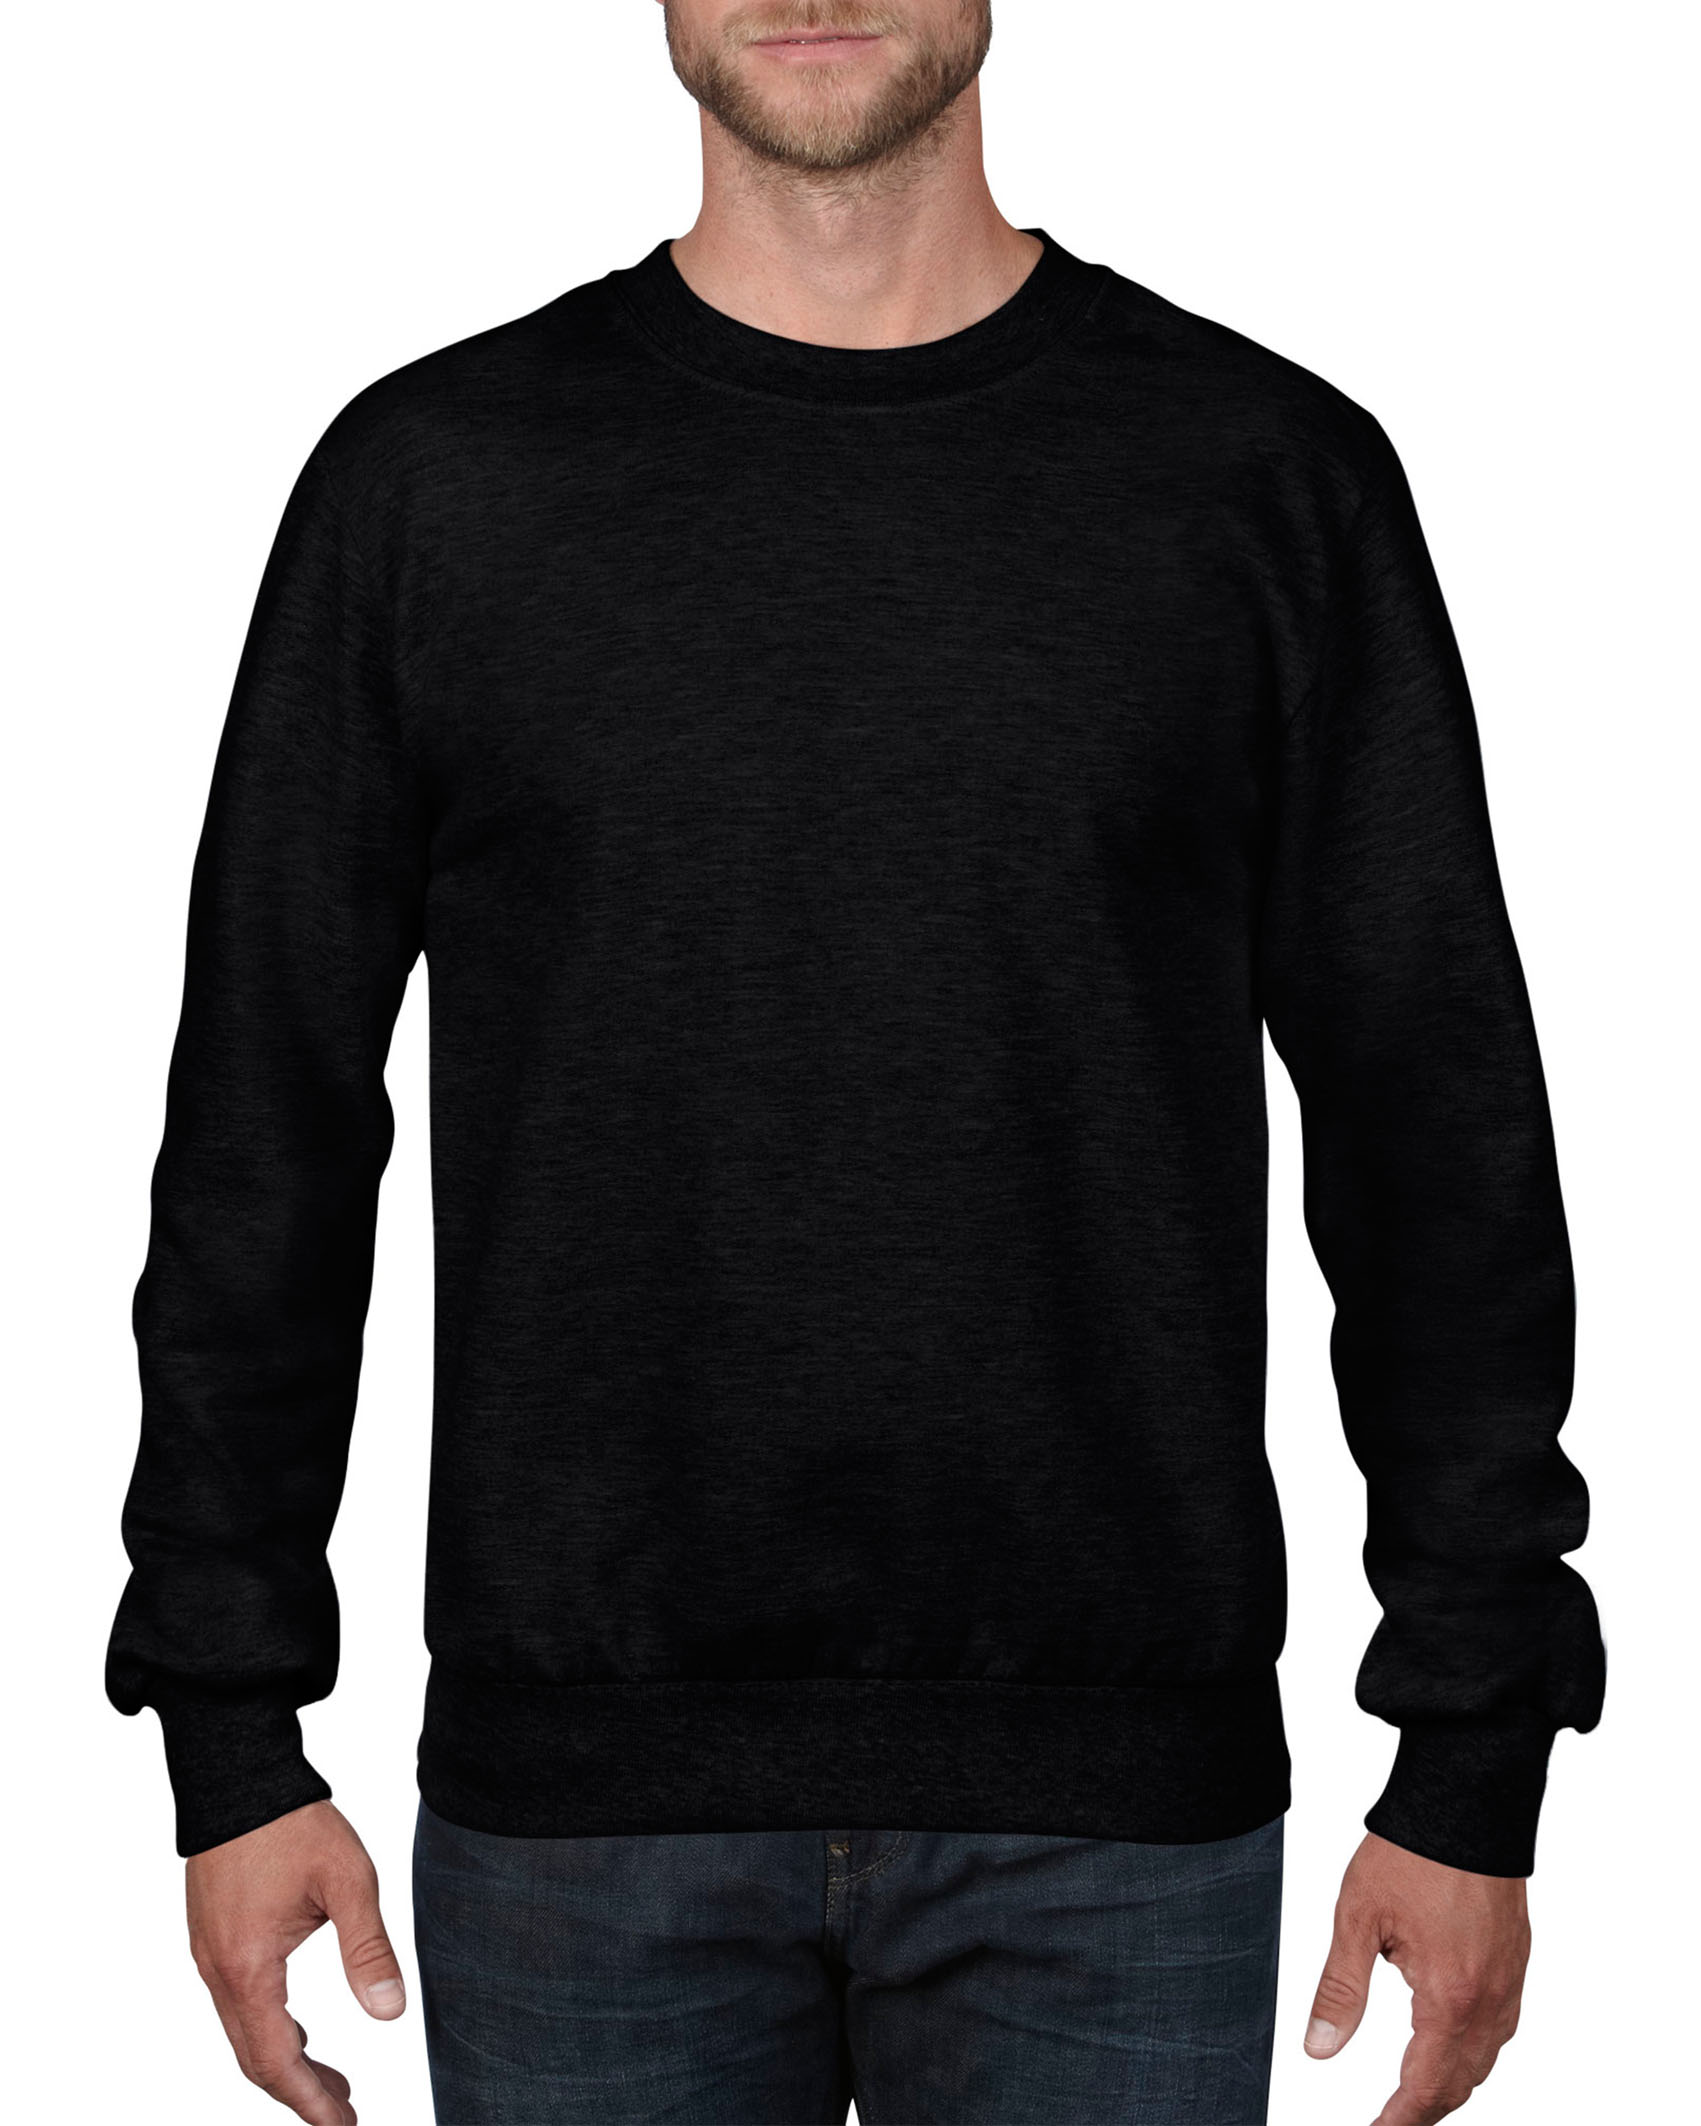 Anvil Sweater Crewneck French Terry for him